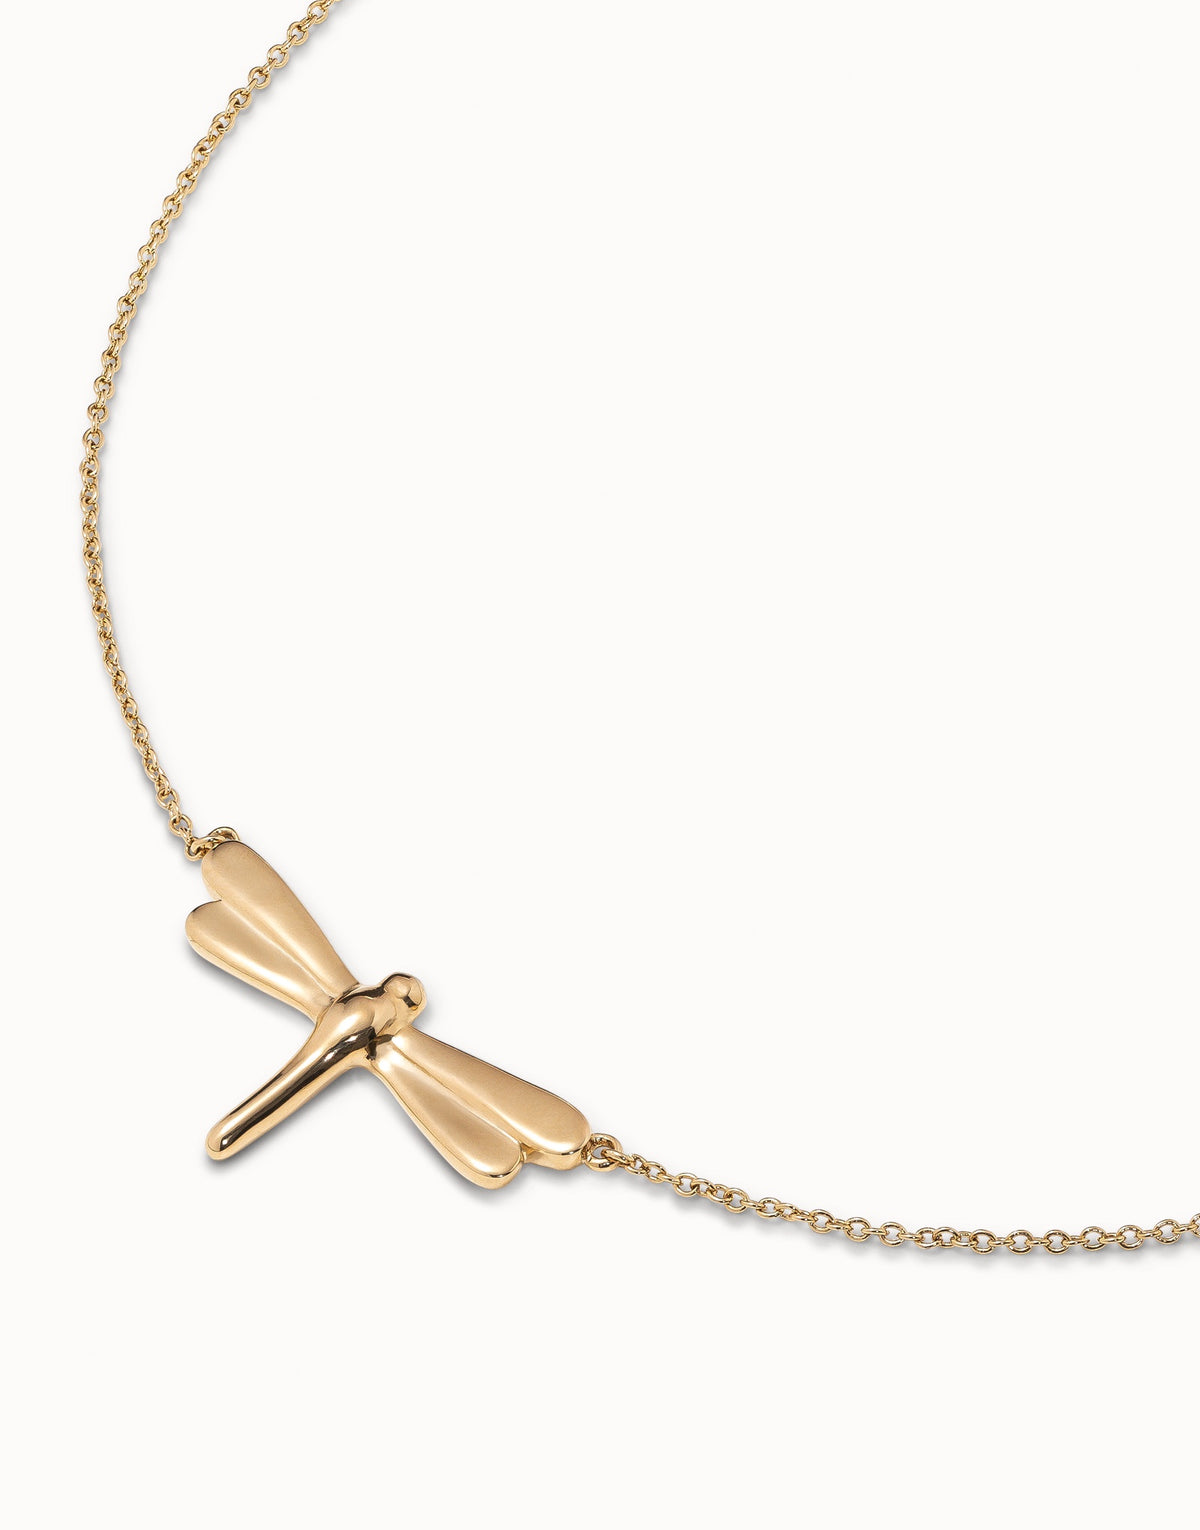 Lady Fortune Gold Necklace